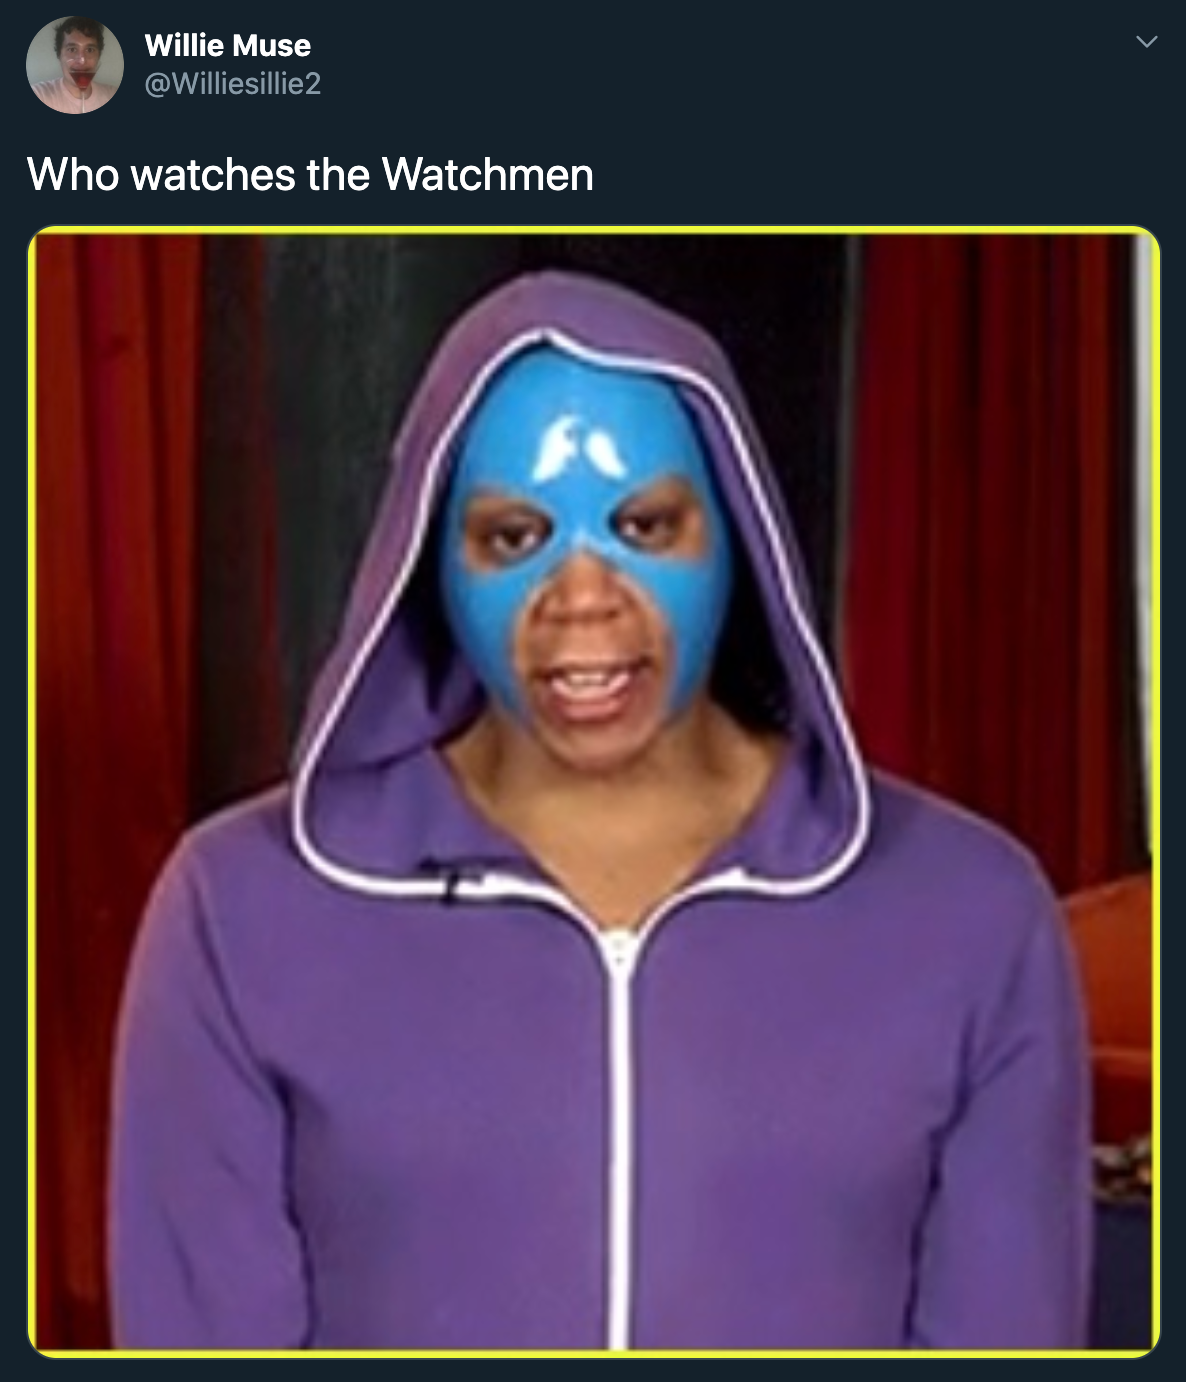 Who watches the Watchmen